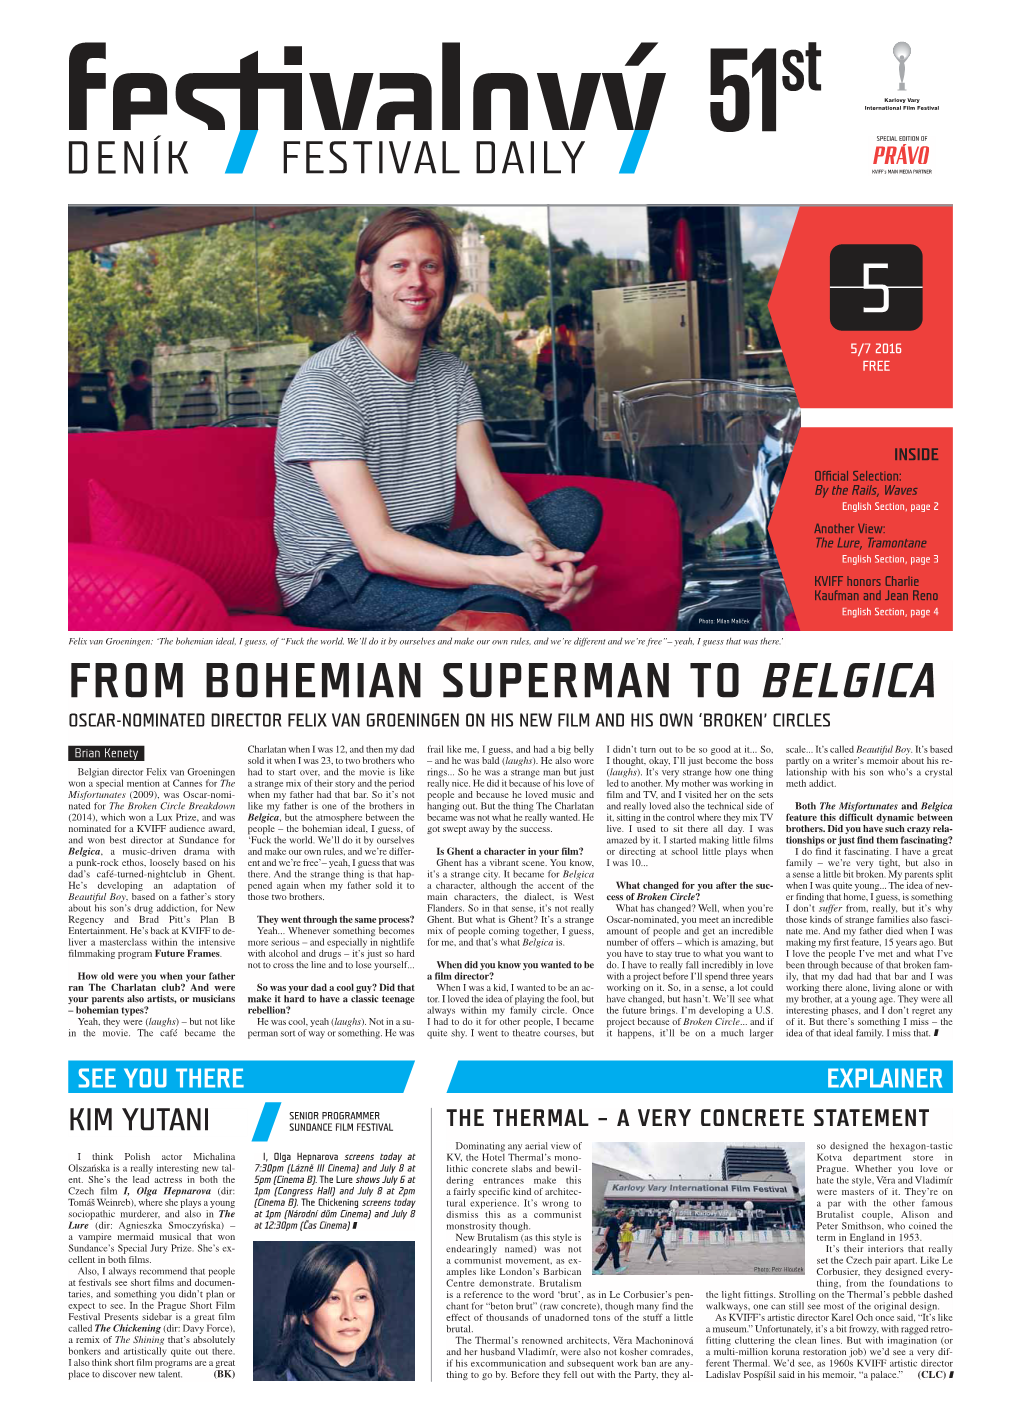 From Bohemian Superman to Belgica Oscar-Nominated Director Felix Van Groeningen on His New Film and His Own ‘Broken’ Circles